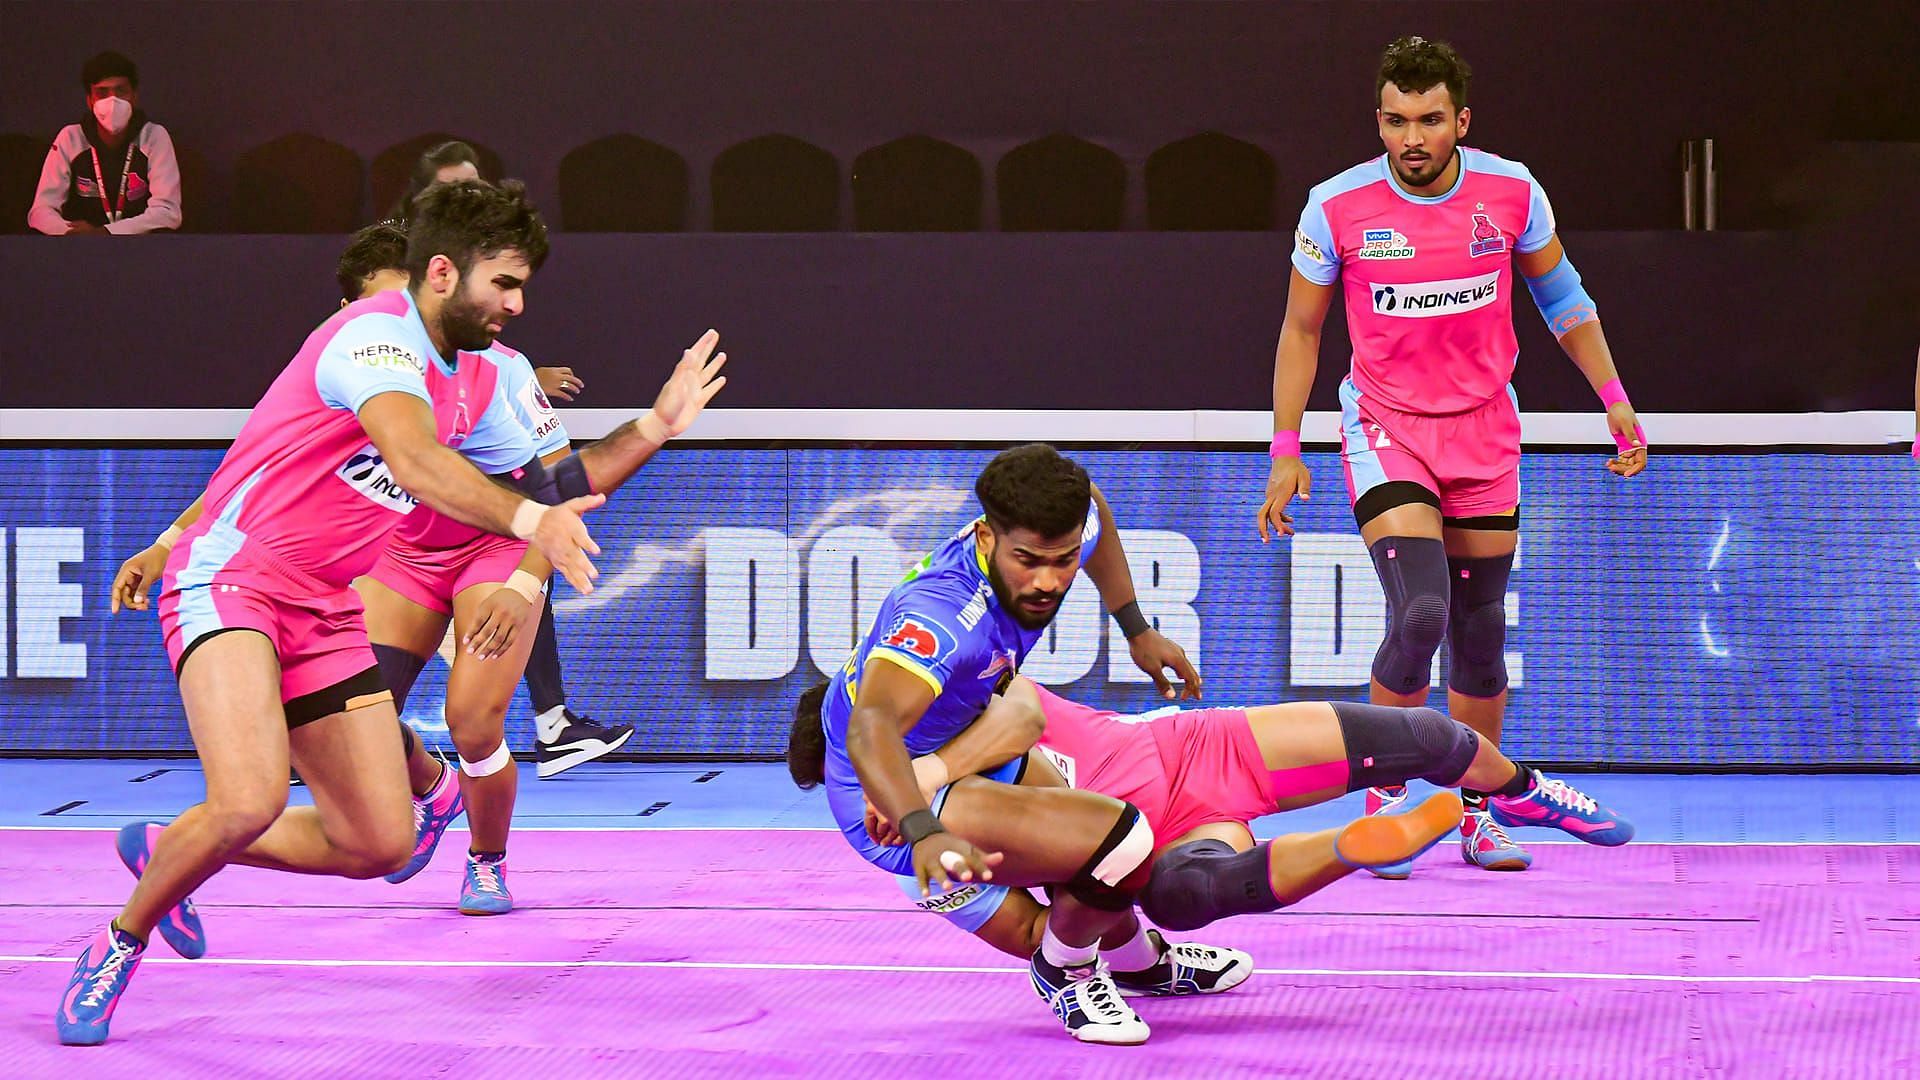 Jaipur Pink Panthers held Tamil Thalaivas to a draw despite trailing by 2 points in the final minute (Image: Pro Kabaddi/Facebook)